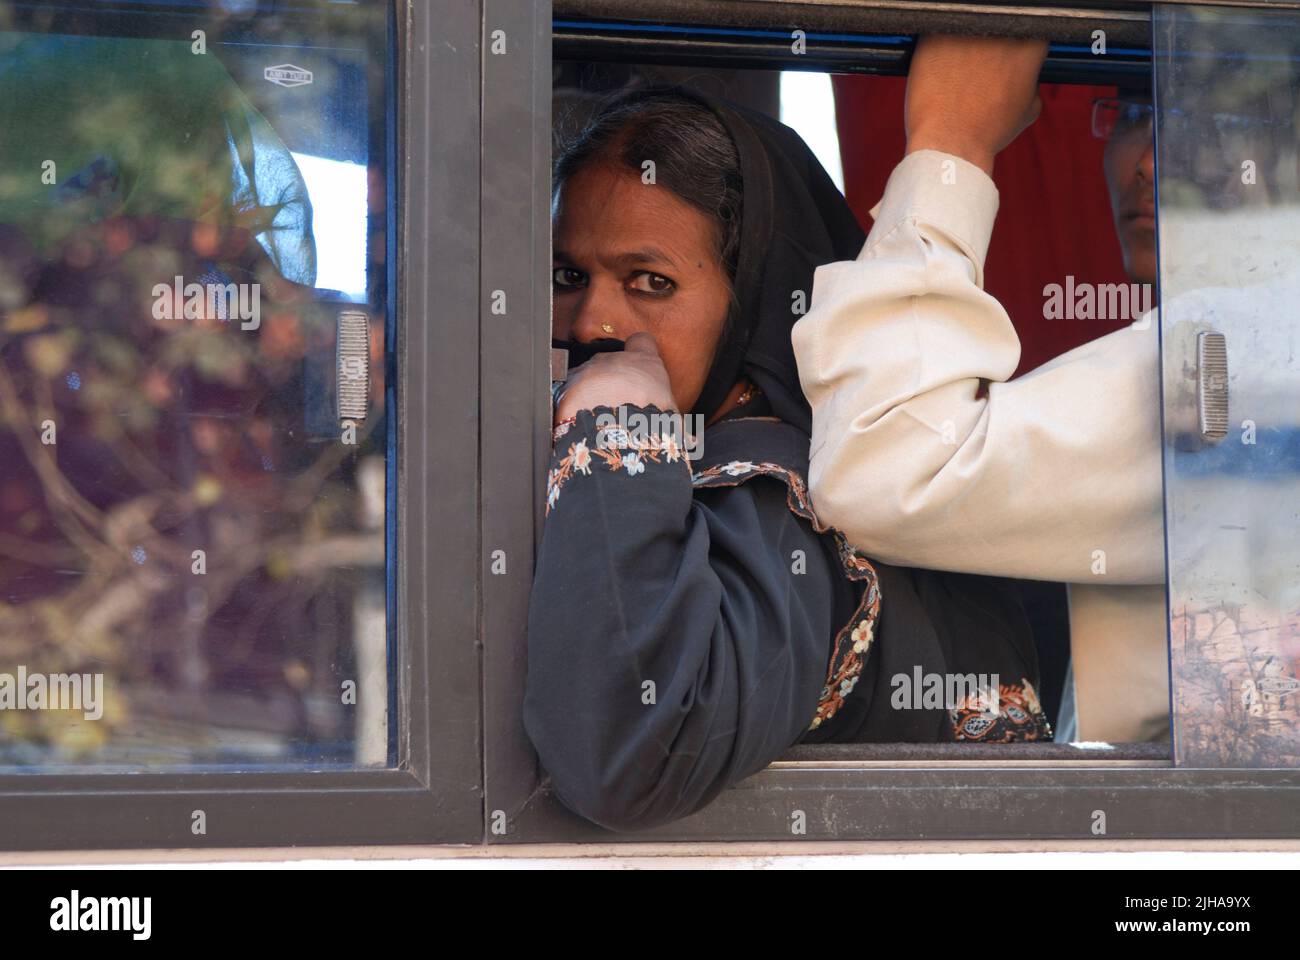 Jaipur, woman in a public bus, India Stock Photo